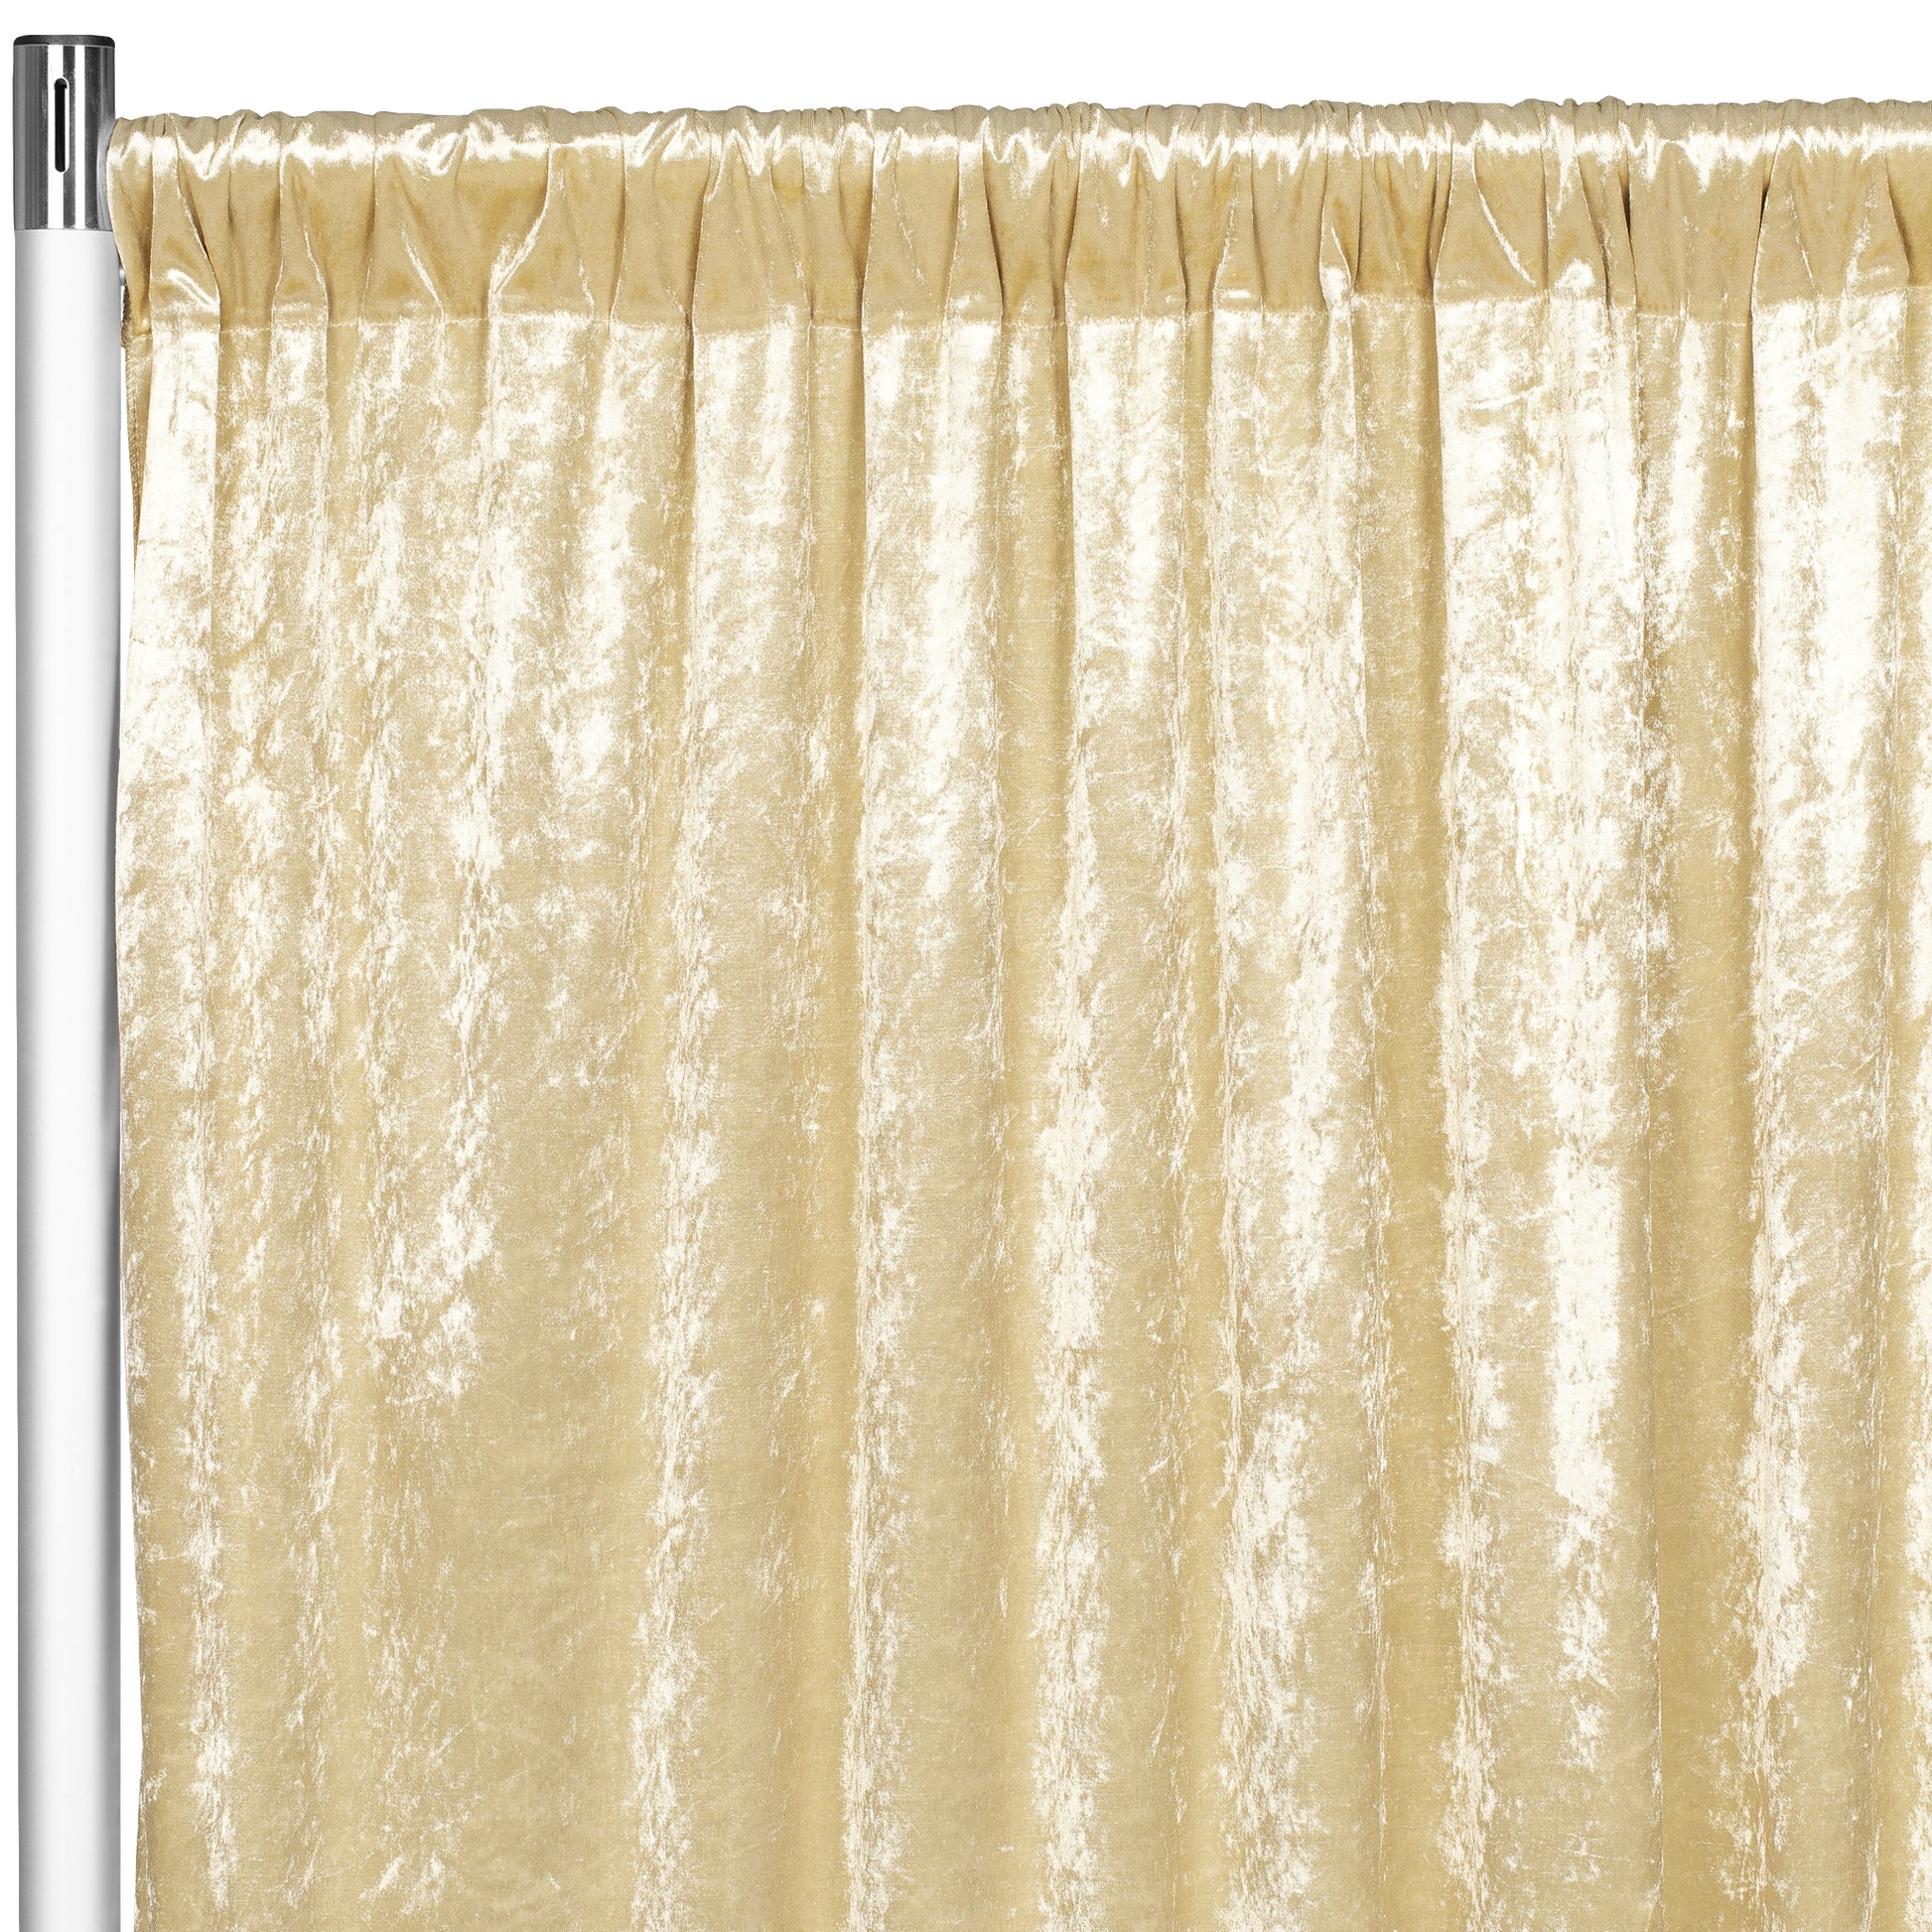 Wedding Arch Draping Fabric 2 Ft x 18Ft Sheer Backdrop Curtain